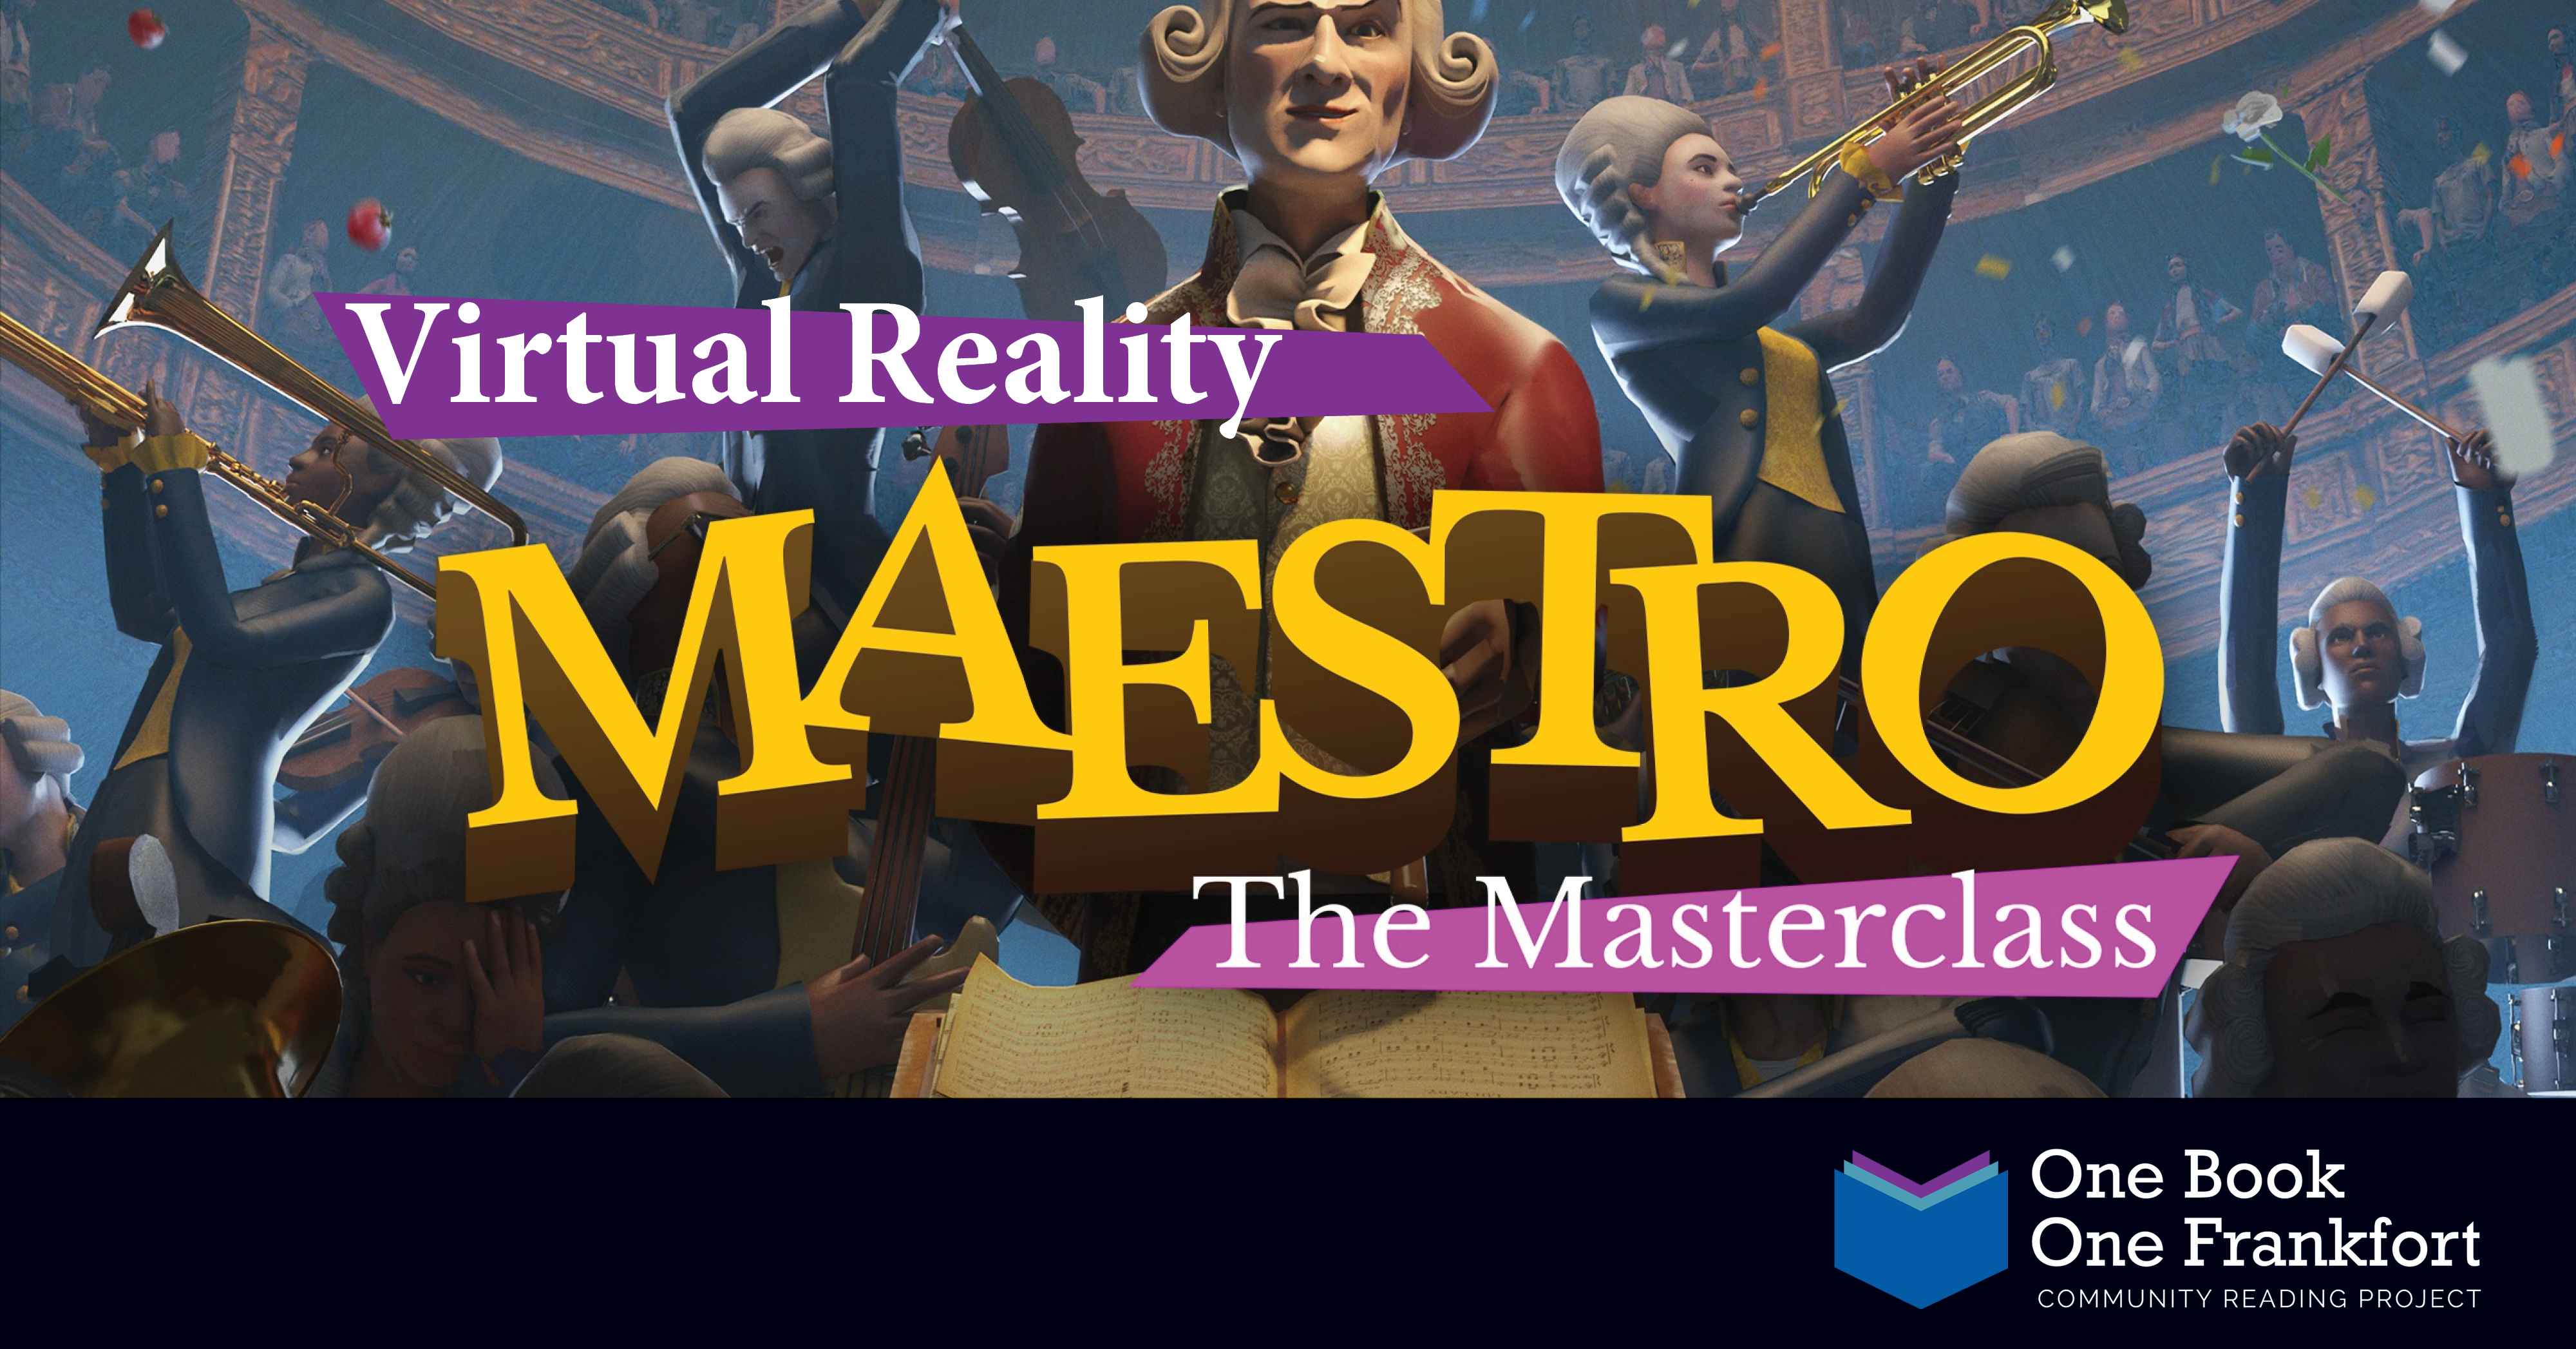 Graphic of conductor from the virtual reality game, Maestro: The Masterclass